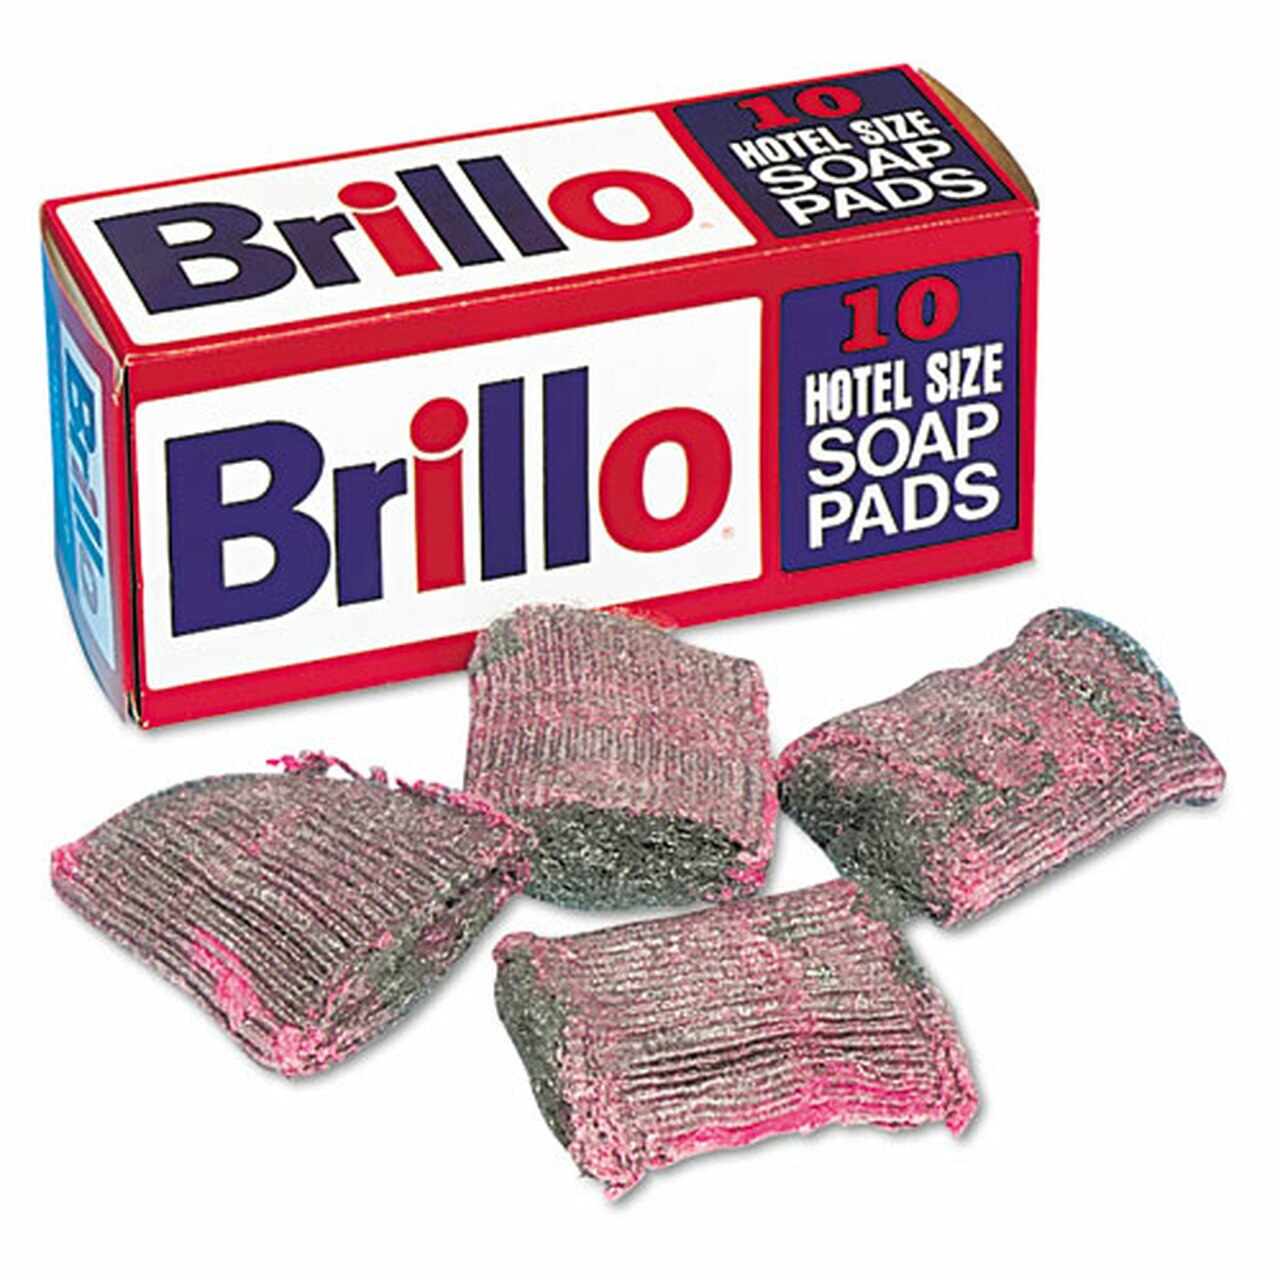 Brillo Hotel Size Steel Wool Soap Pads, Alma Gourmet Online Store - The  Finest Italian Food Products